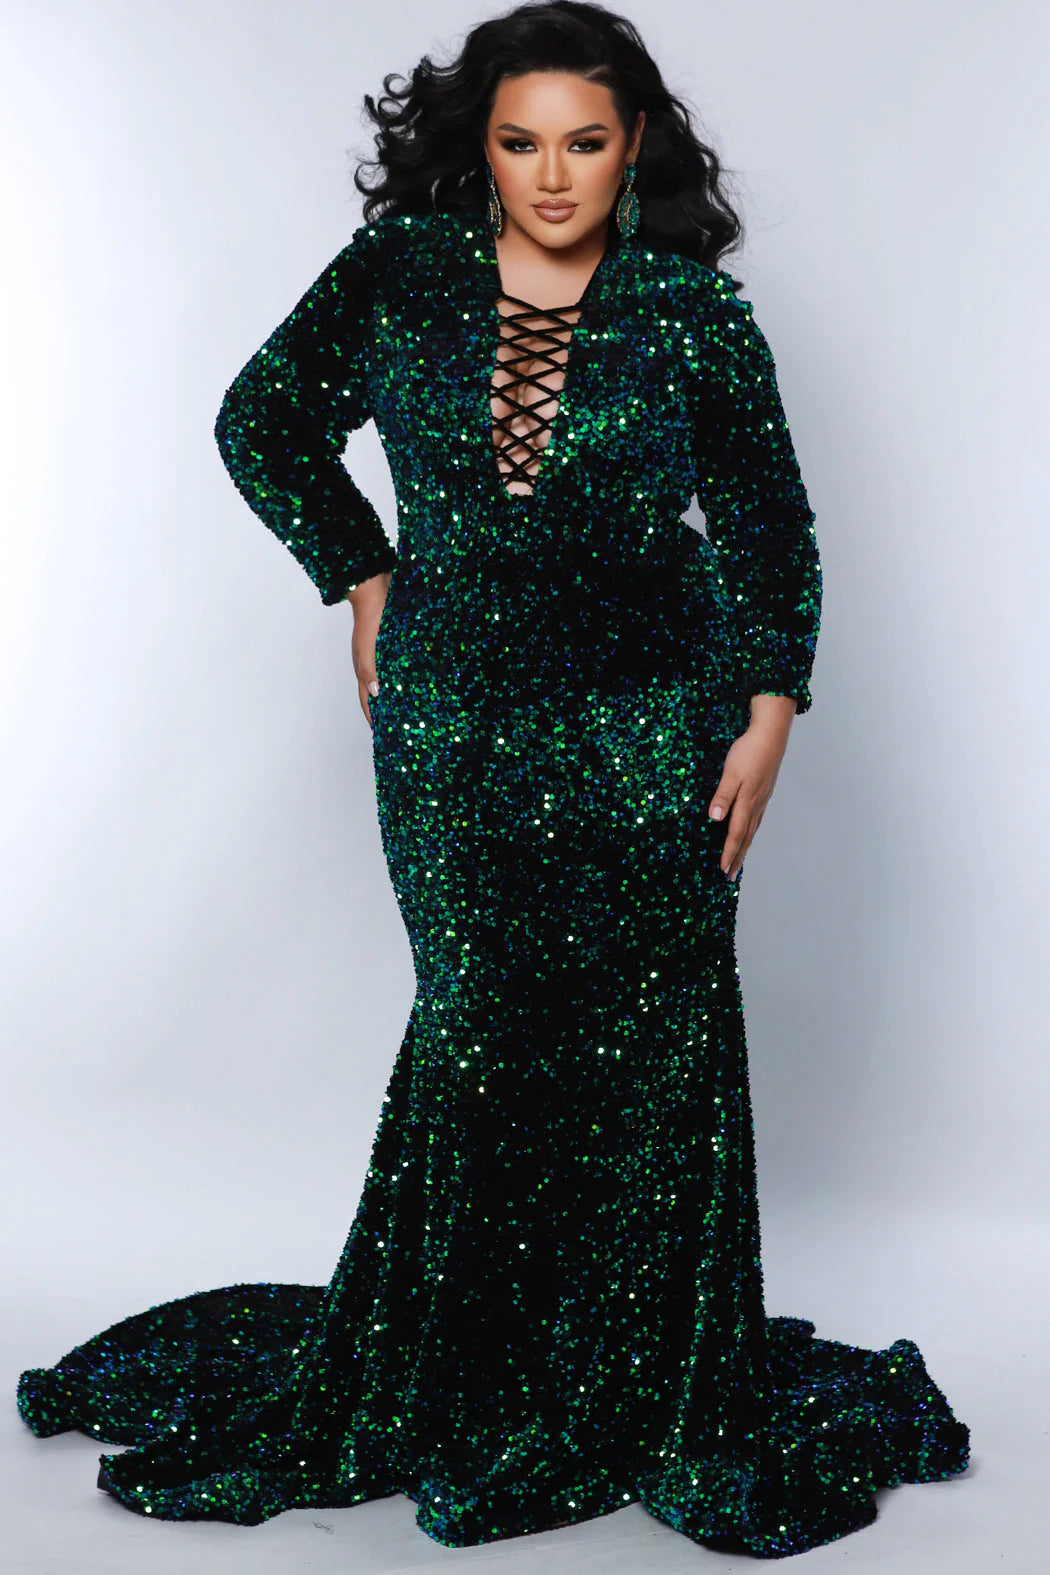 This Sydneys Closet dress is perfect for special occasions. It features a figure-hugging mermaid silhouette, a train, and a V-neckline with long sleeves. The fabric is a luxurious blend of sequin and velvet for a stunning look. The corset ensures a perfect fit for plus size wearers. Our Clutch plus size sequin Mermaid gown guarantees you'll dazzle everyone at a Pageant, Prom 2024 or any black-tie event.